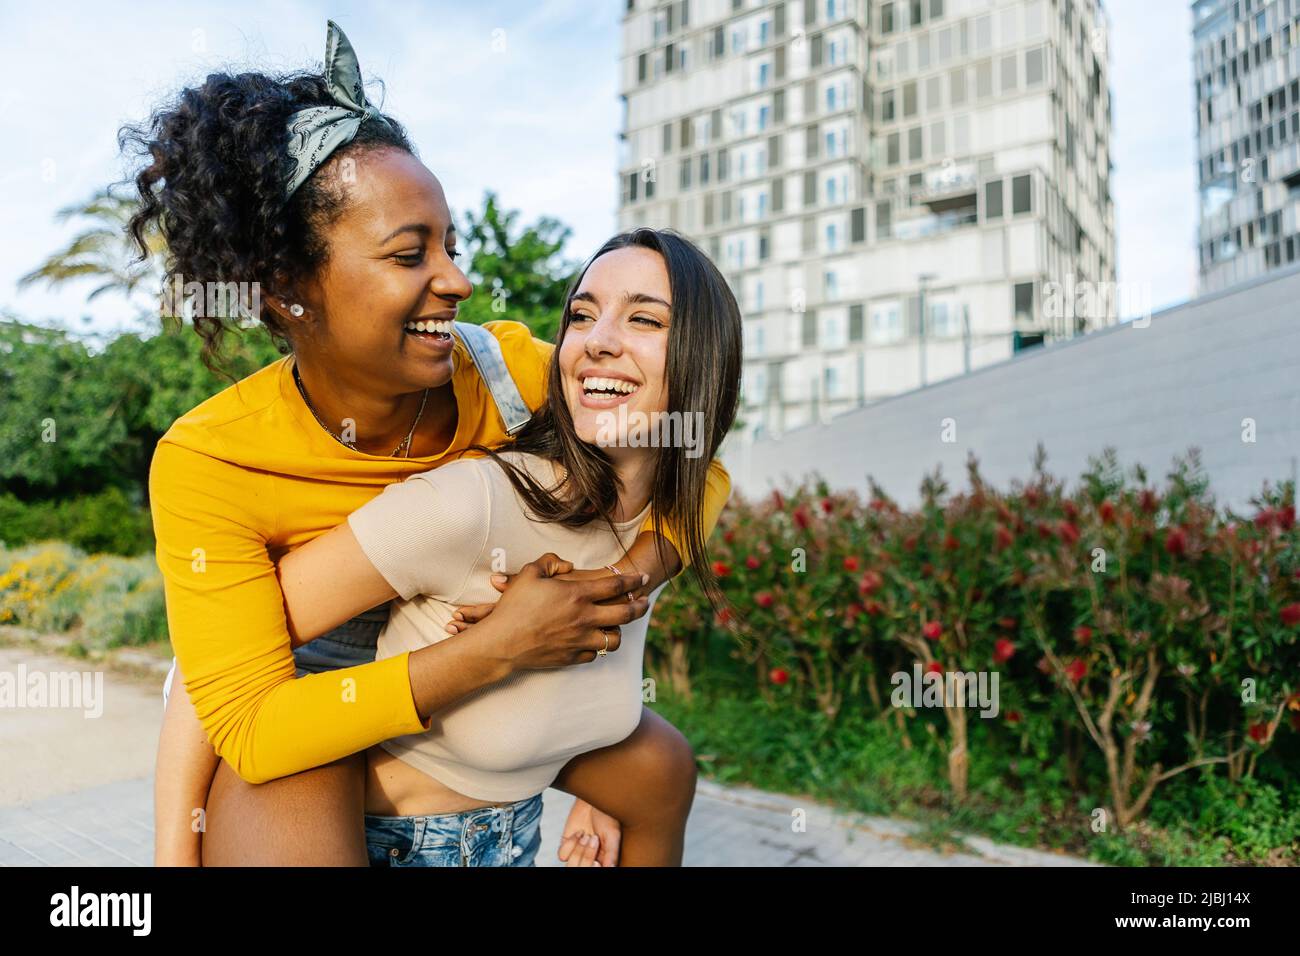 Couple of young women in love piggybacking in city street Stock Photo